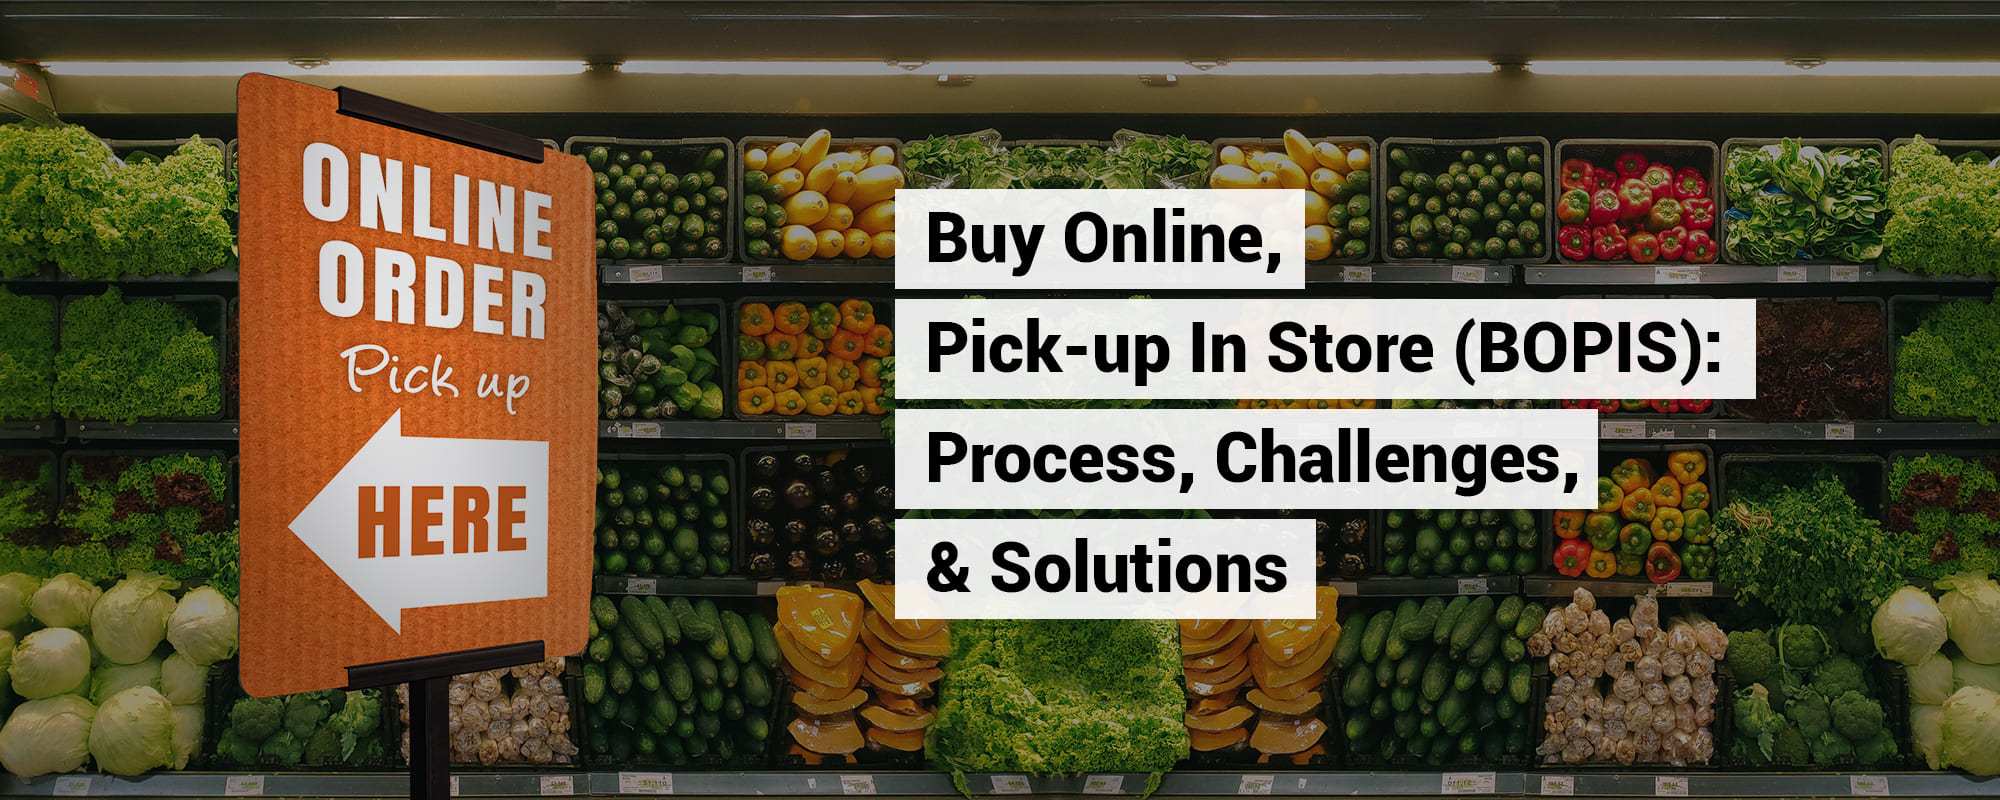 Buy Online, Pick-up In Store (Click and Collect) Shopping: Creating an Omnichannel Experience in Grocery Retail Industry